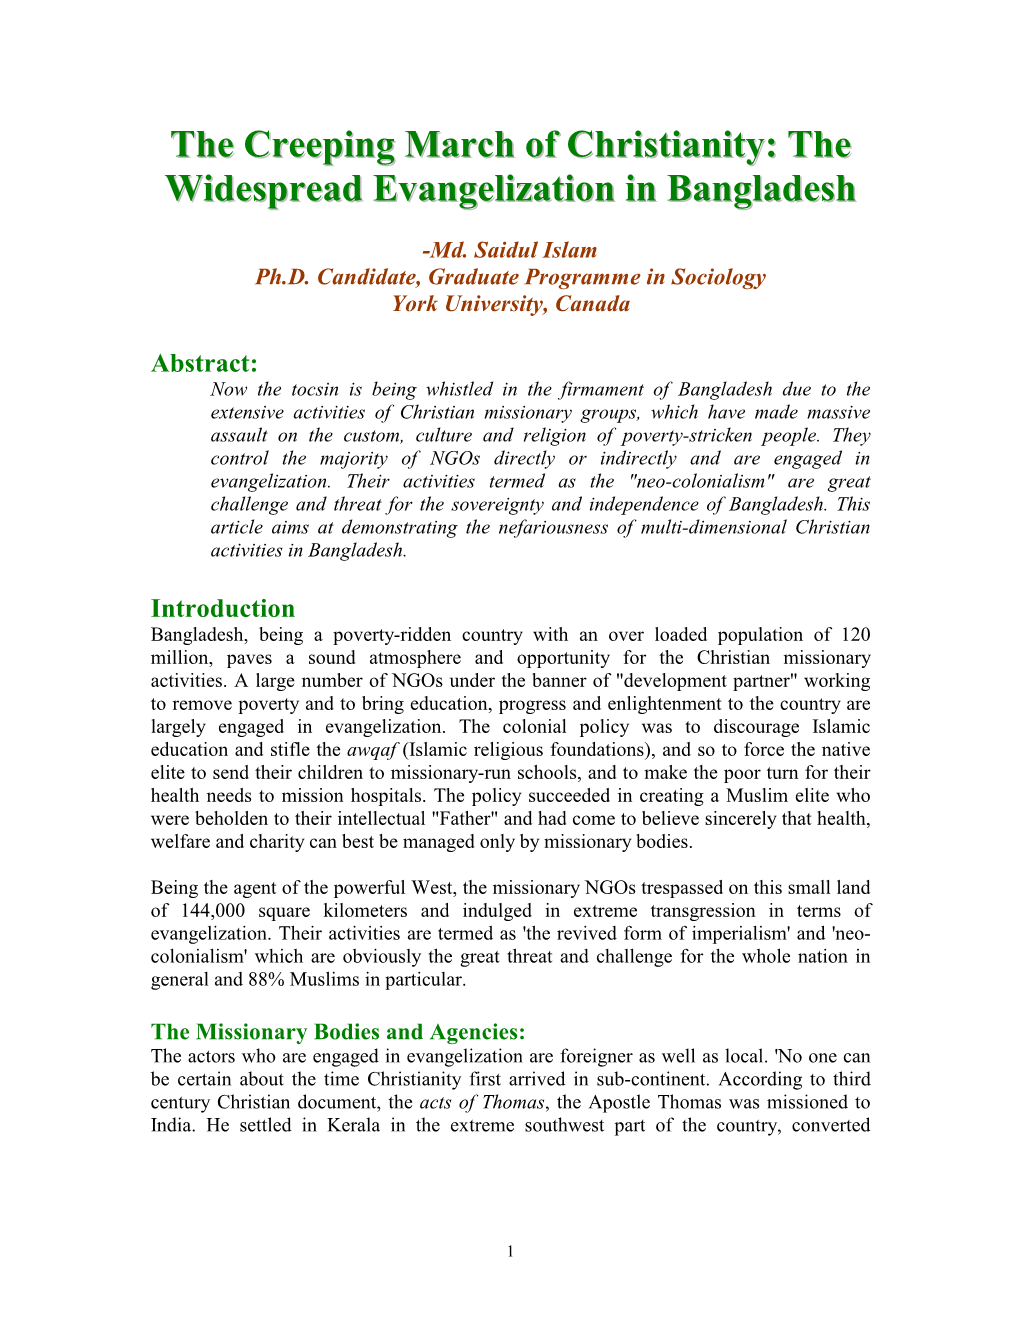 The Creeping March of Christianity: the Widespread Evangelization in Bangladesh